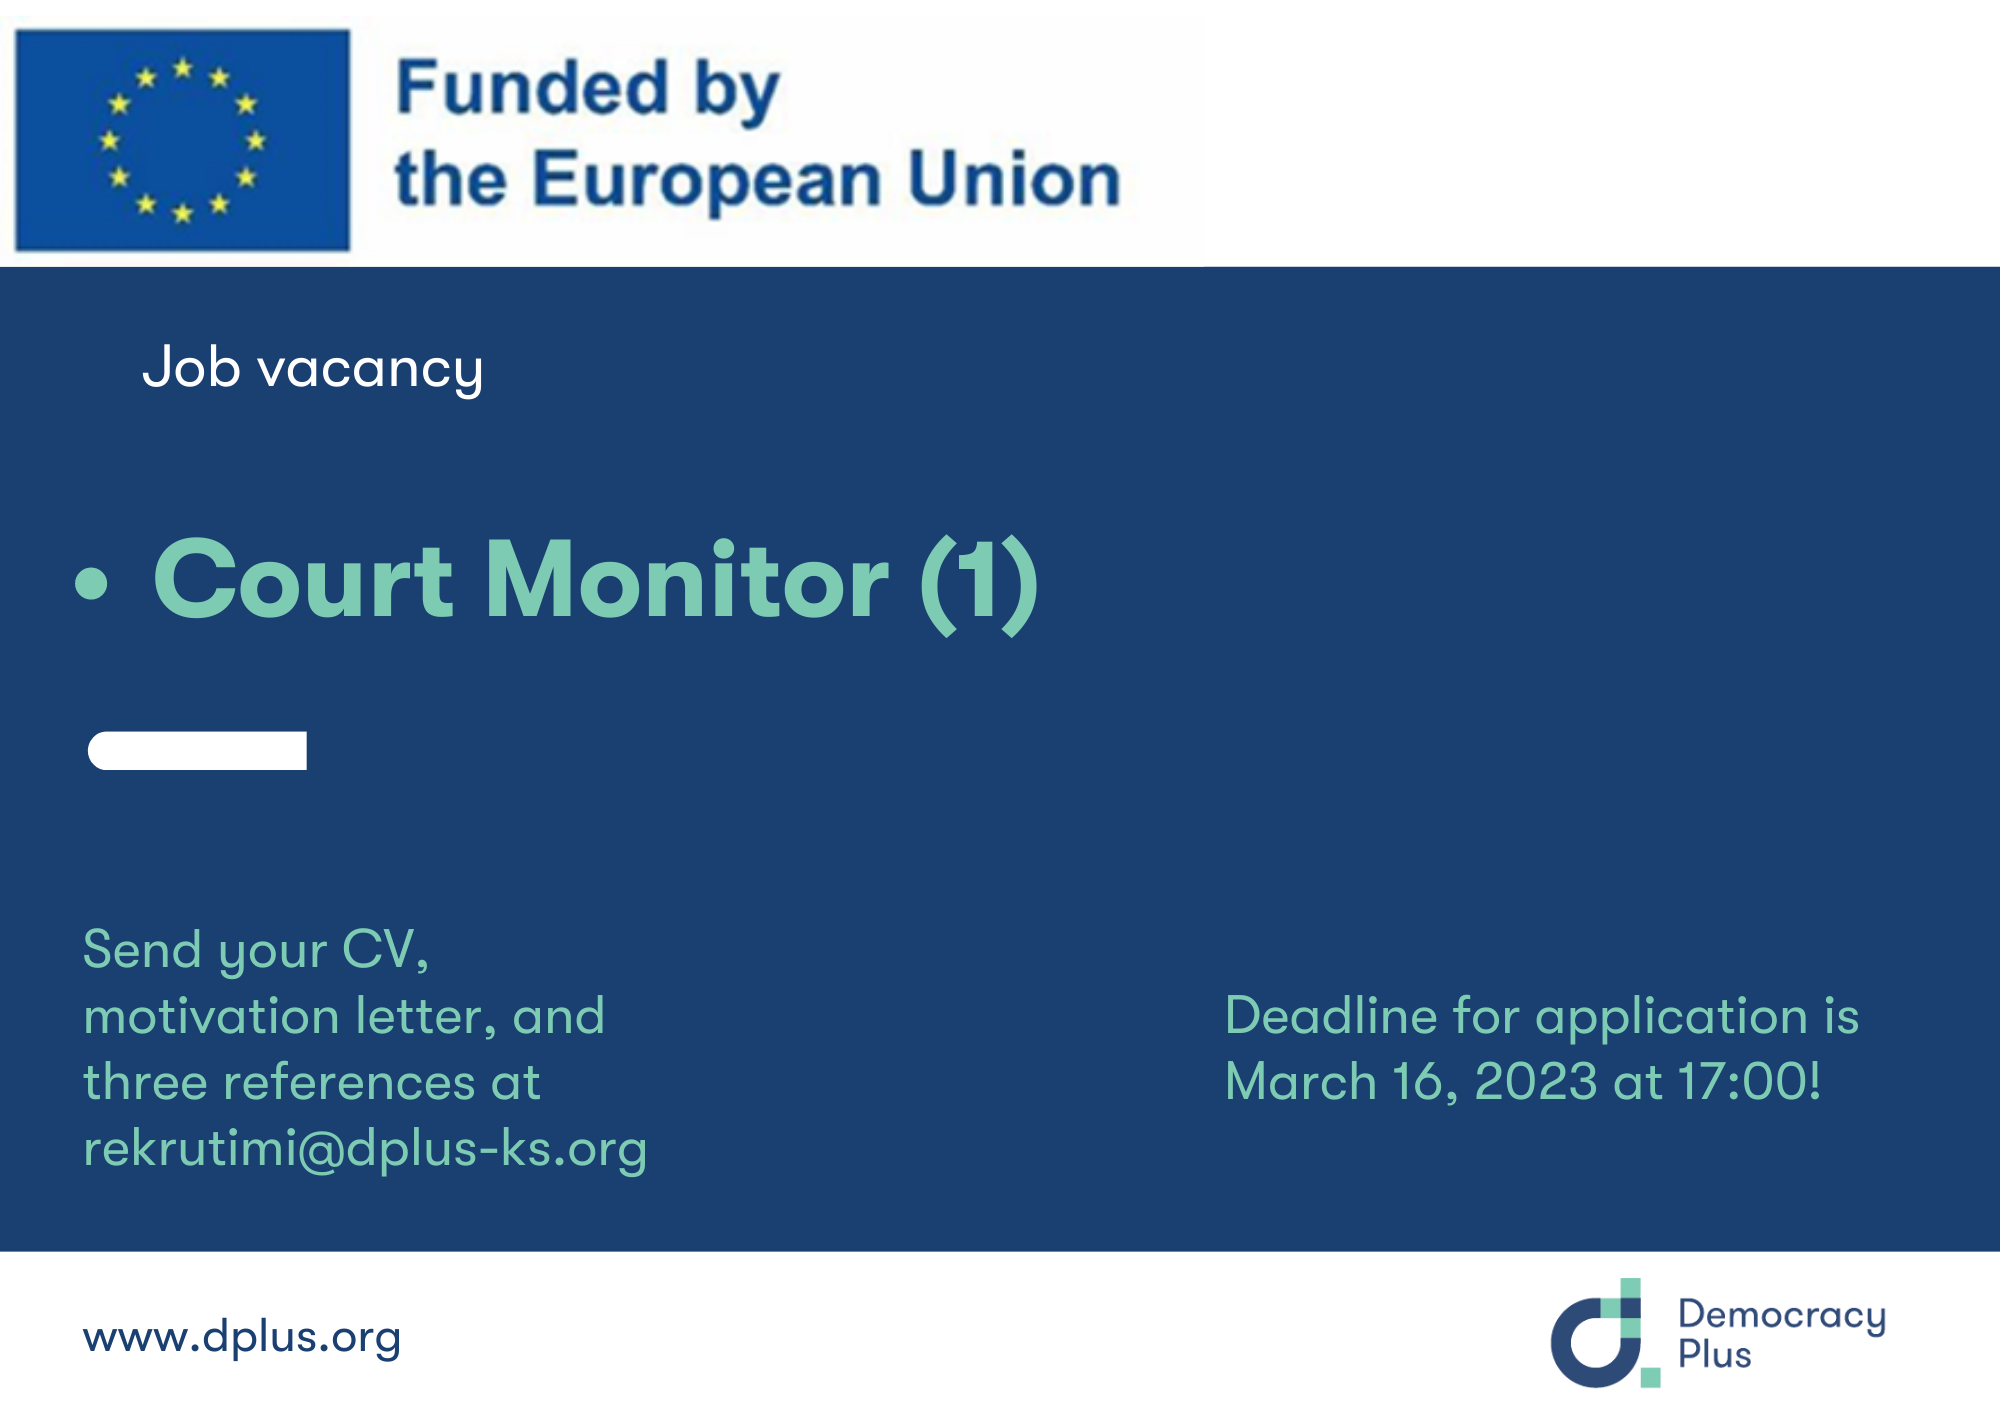 Recruitment for Court Monitor